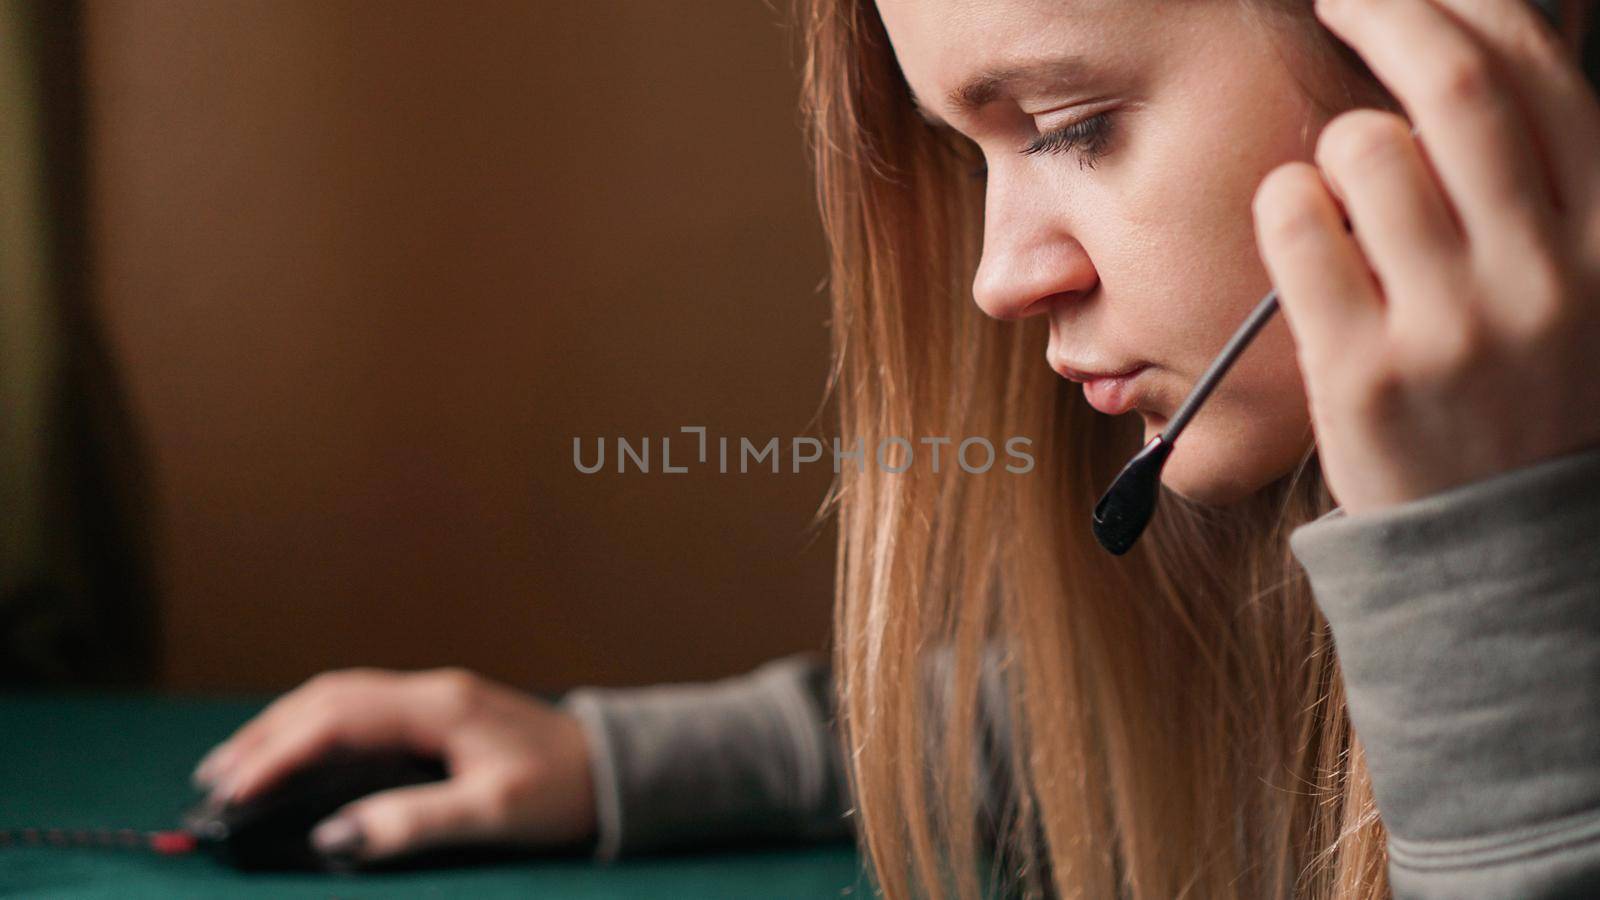 Portrait of a young girl in a hoodie and with a headset. Call center worker. She holds the earpiece to hear the client better. Communication problems. Remote work from home. Brown tones pictures